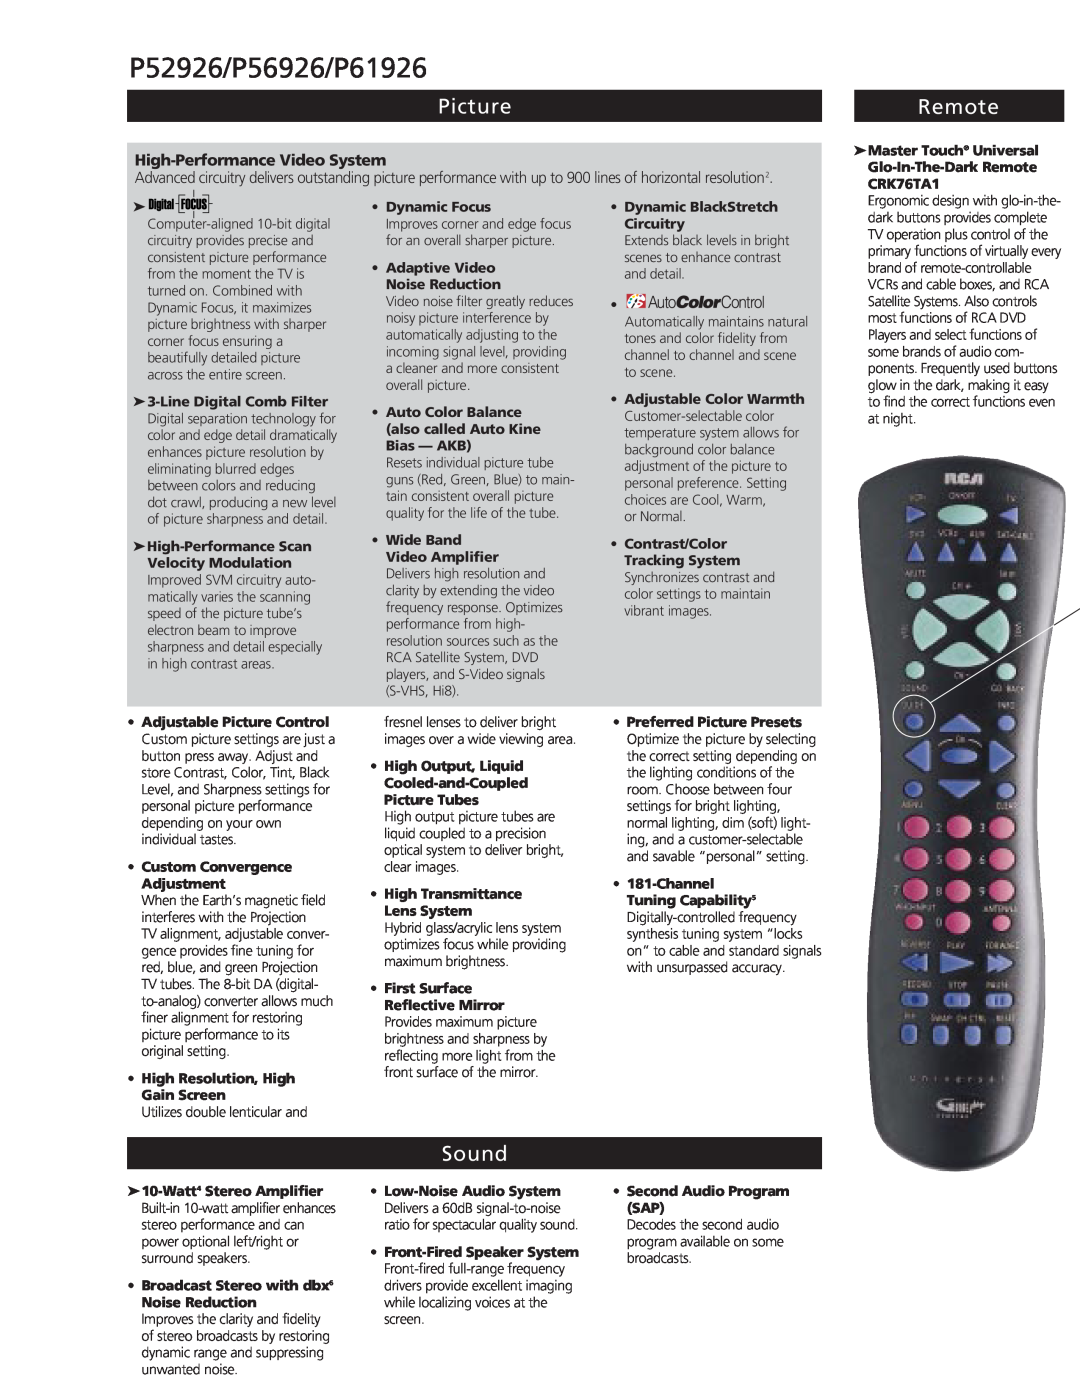 RCA manual Picture, Remote, Sound, P52926/P56926/P61926, High-Performance Video System 